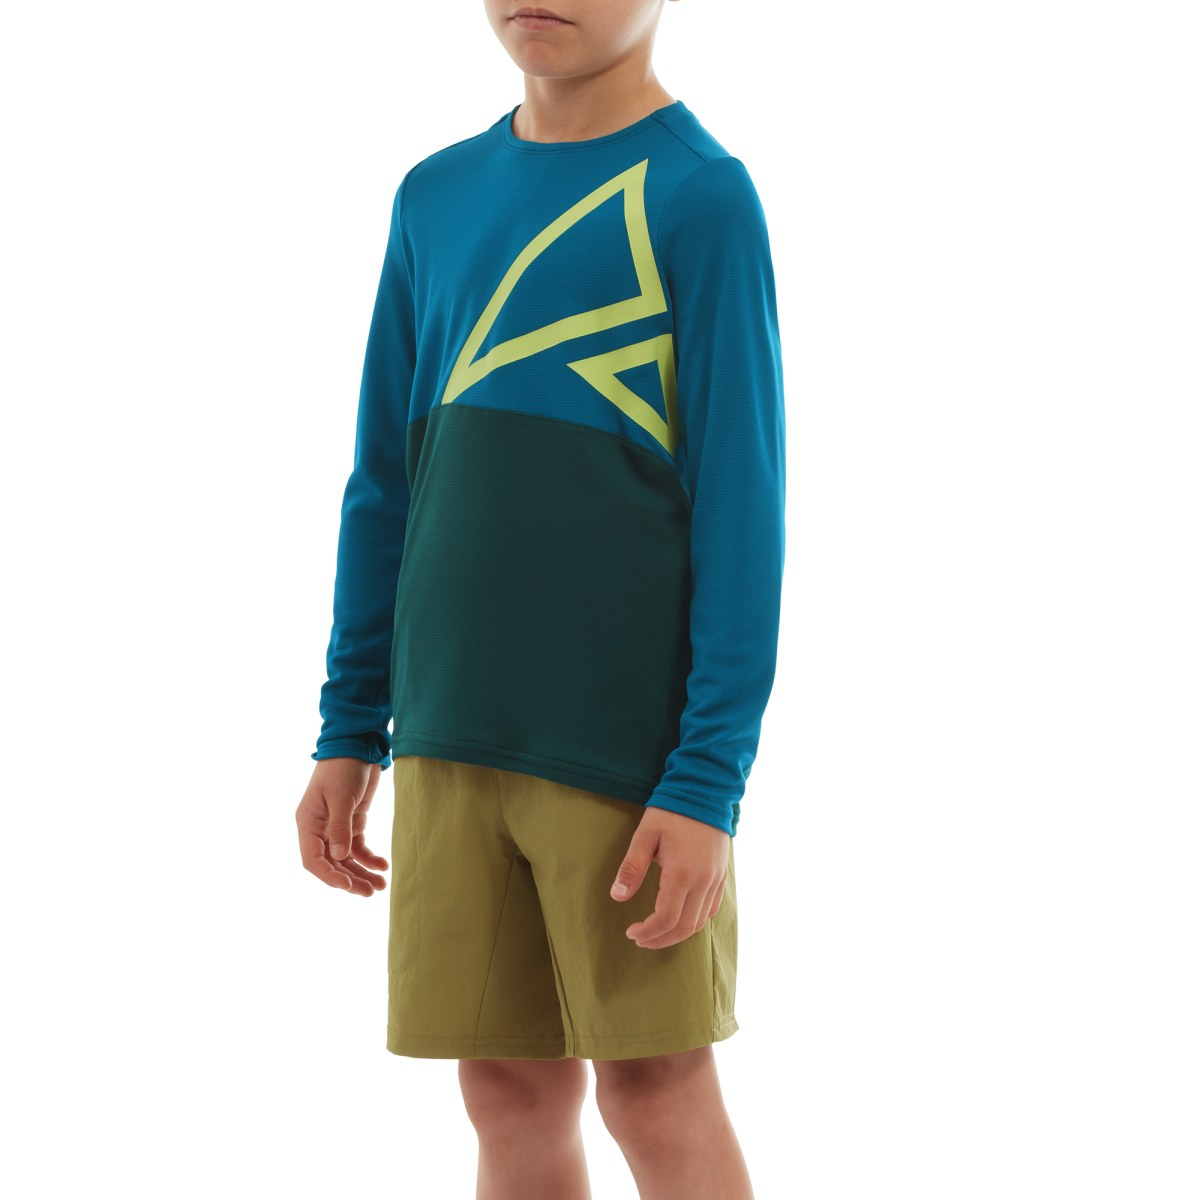 Altura  Spark Lightweight Kids Long Sleeve Jersey 9 to 10 Years BLUE/TEAL